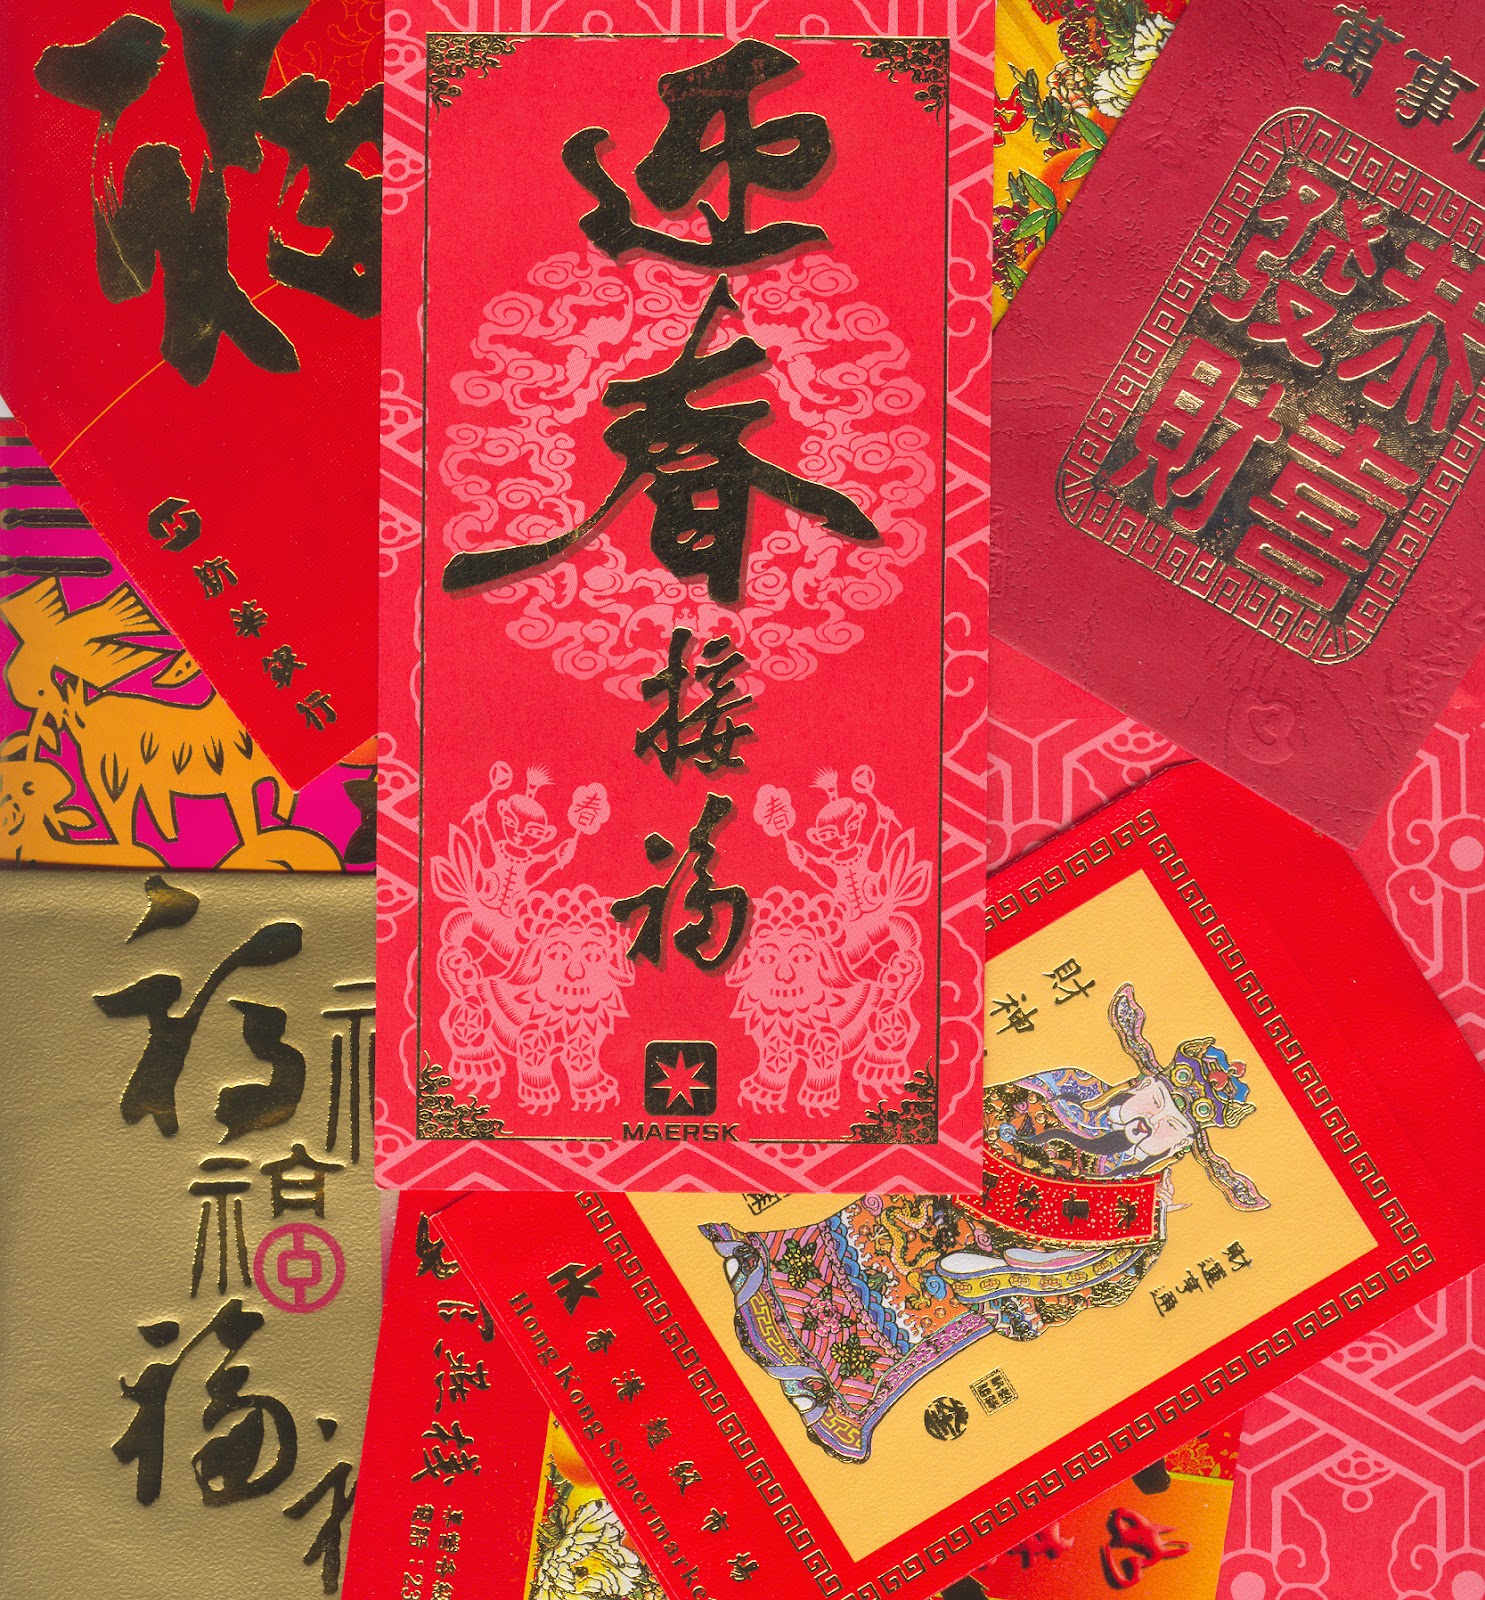 Traditional Chinese New Year practices, red envelopes